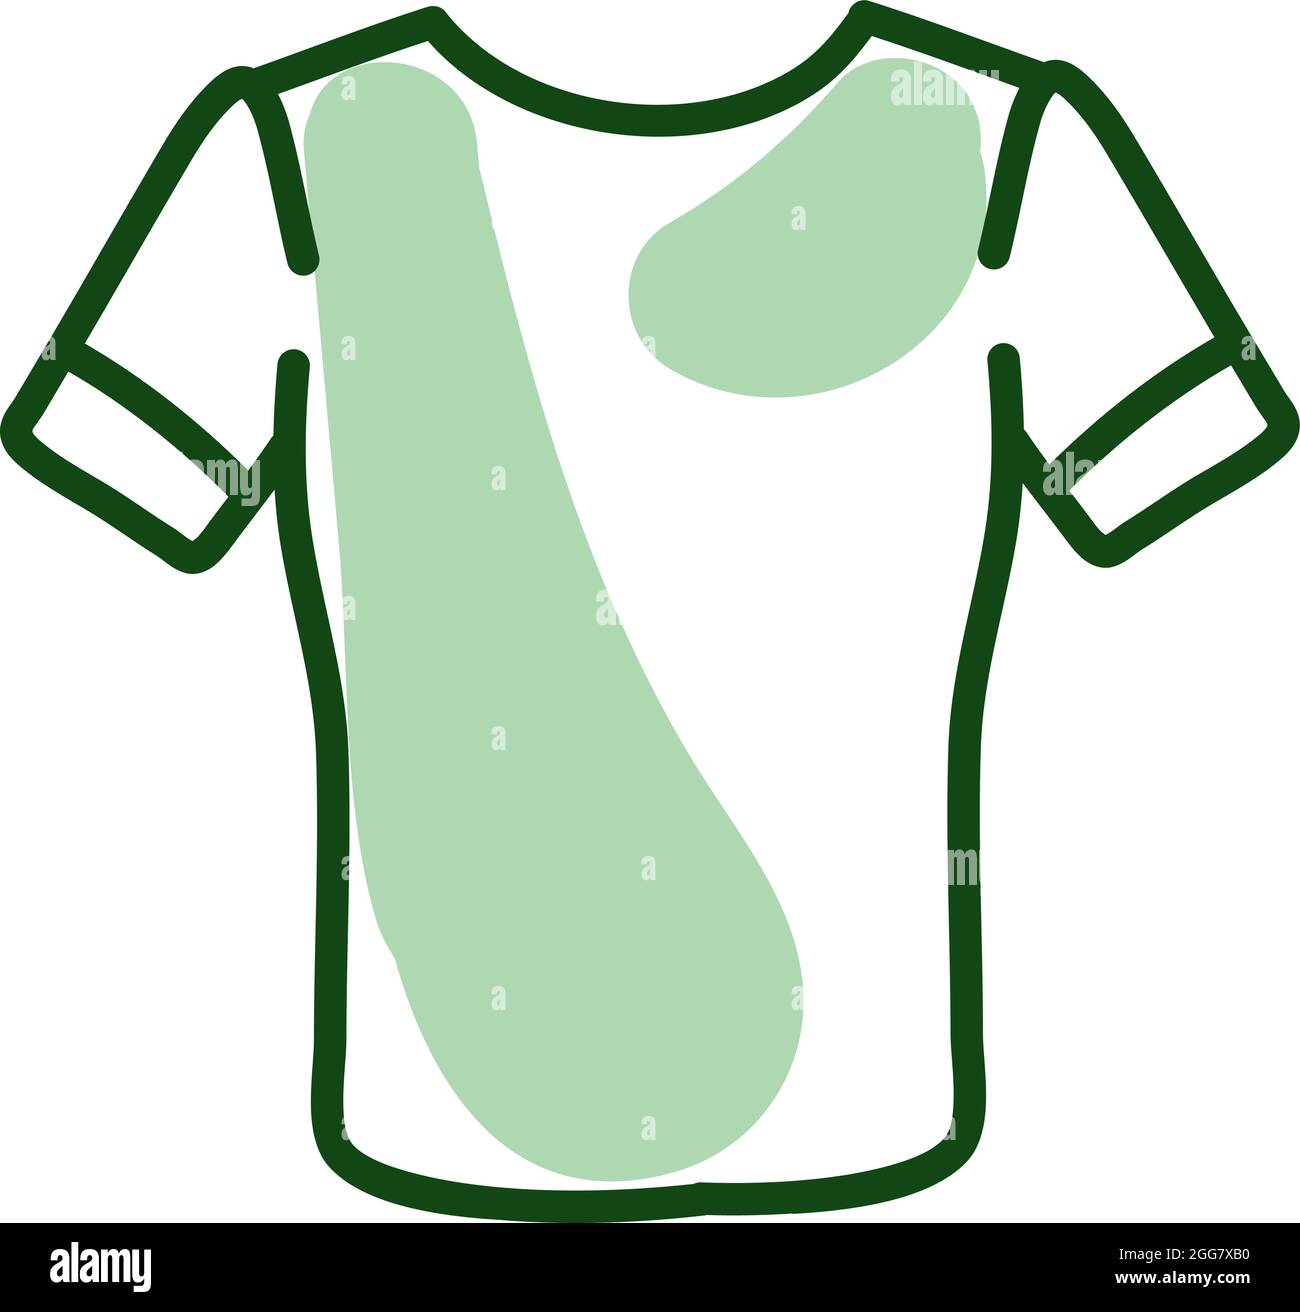 Louis Vuitton logo T-shirt mockup in green colors. Mockup of realistic shirt  with short sleeves. Blank t-shirt template with empty space for design. L  Stock Vector Image & Art - Alamy